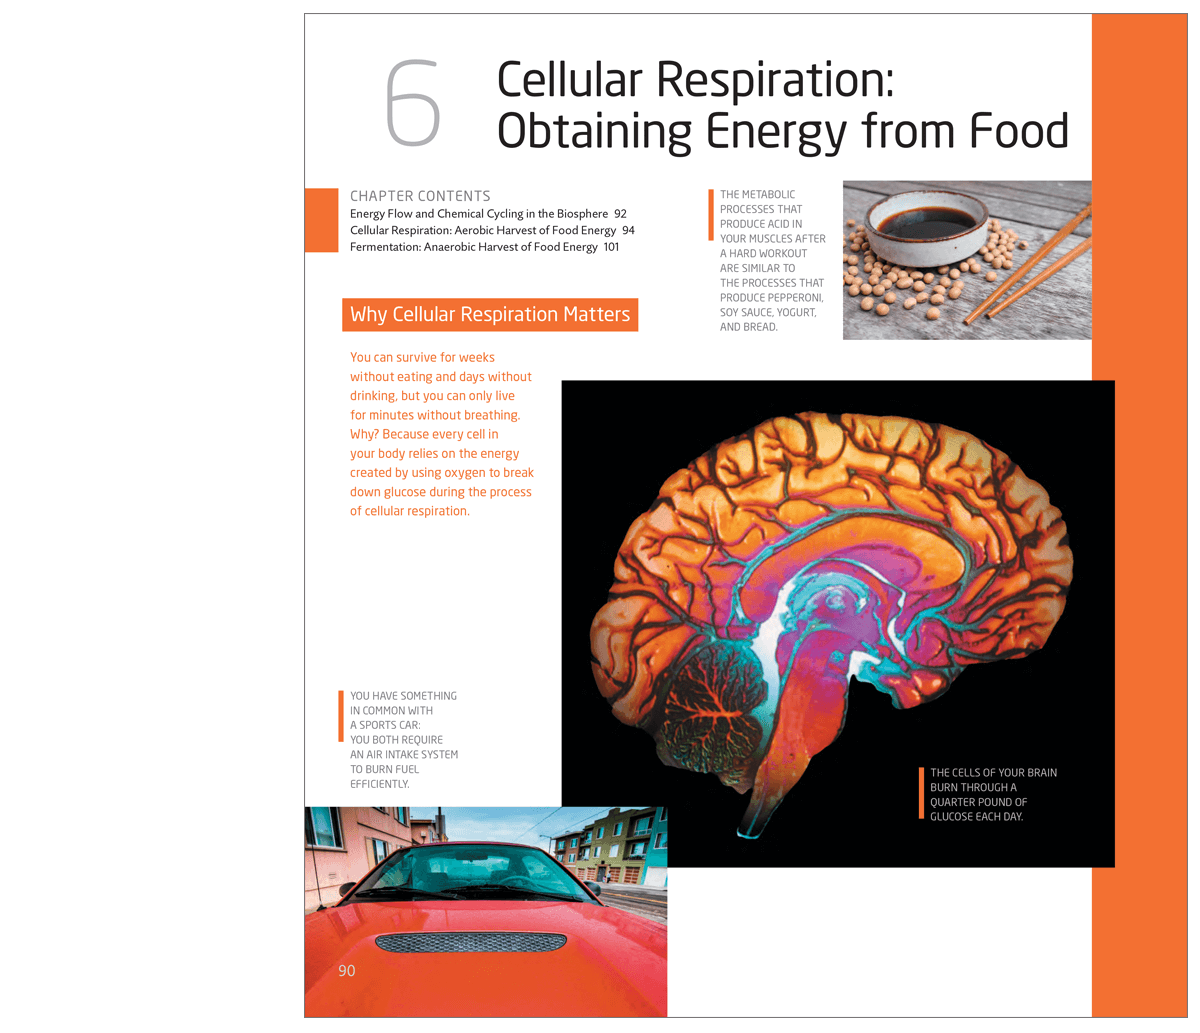 Example page showing Cellular Respiration: Obtaining Energy from Food